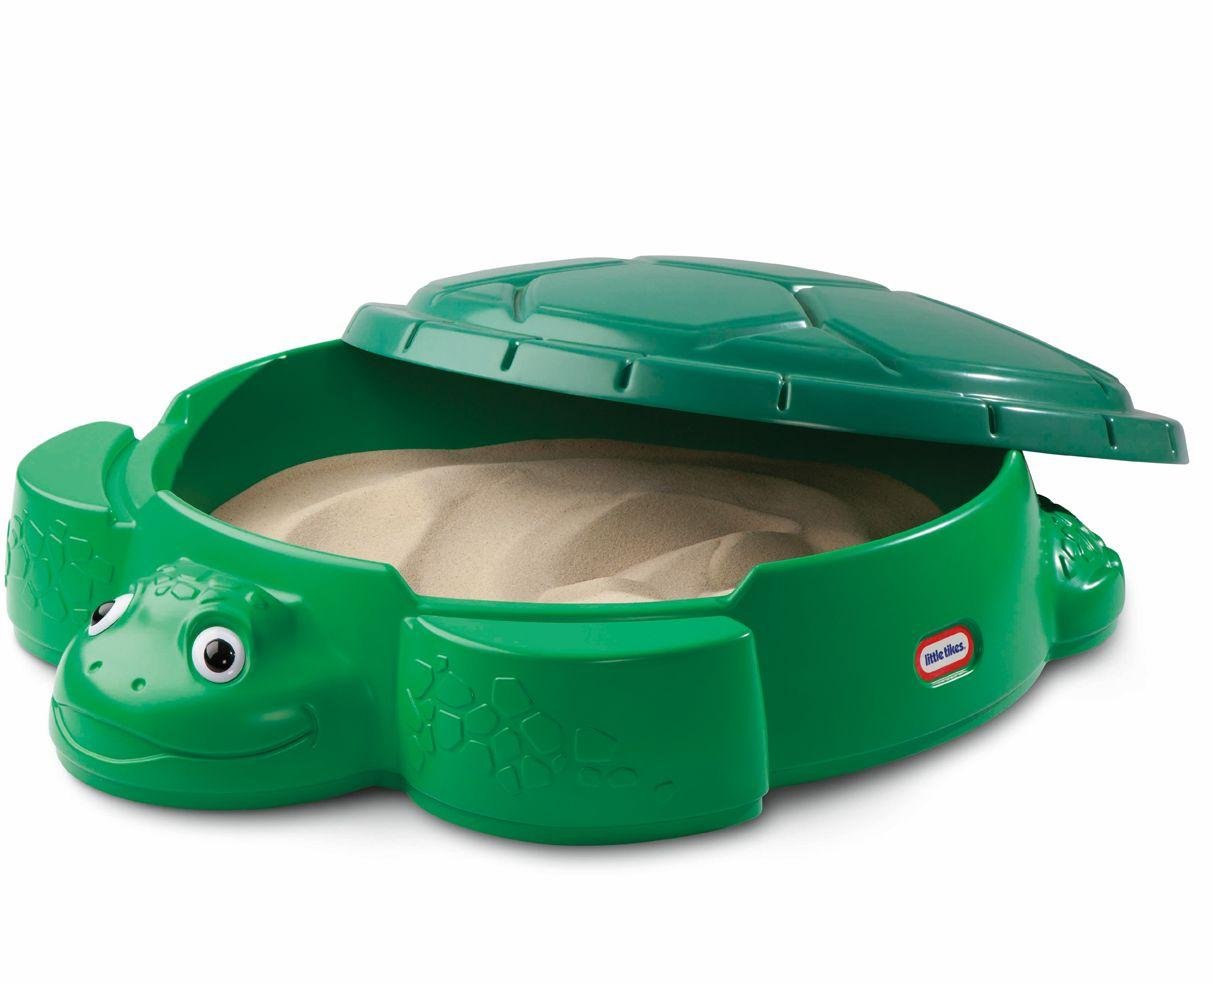 Little Tikes Turtle Sand Pit with Cover Review